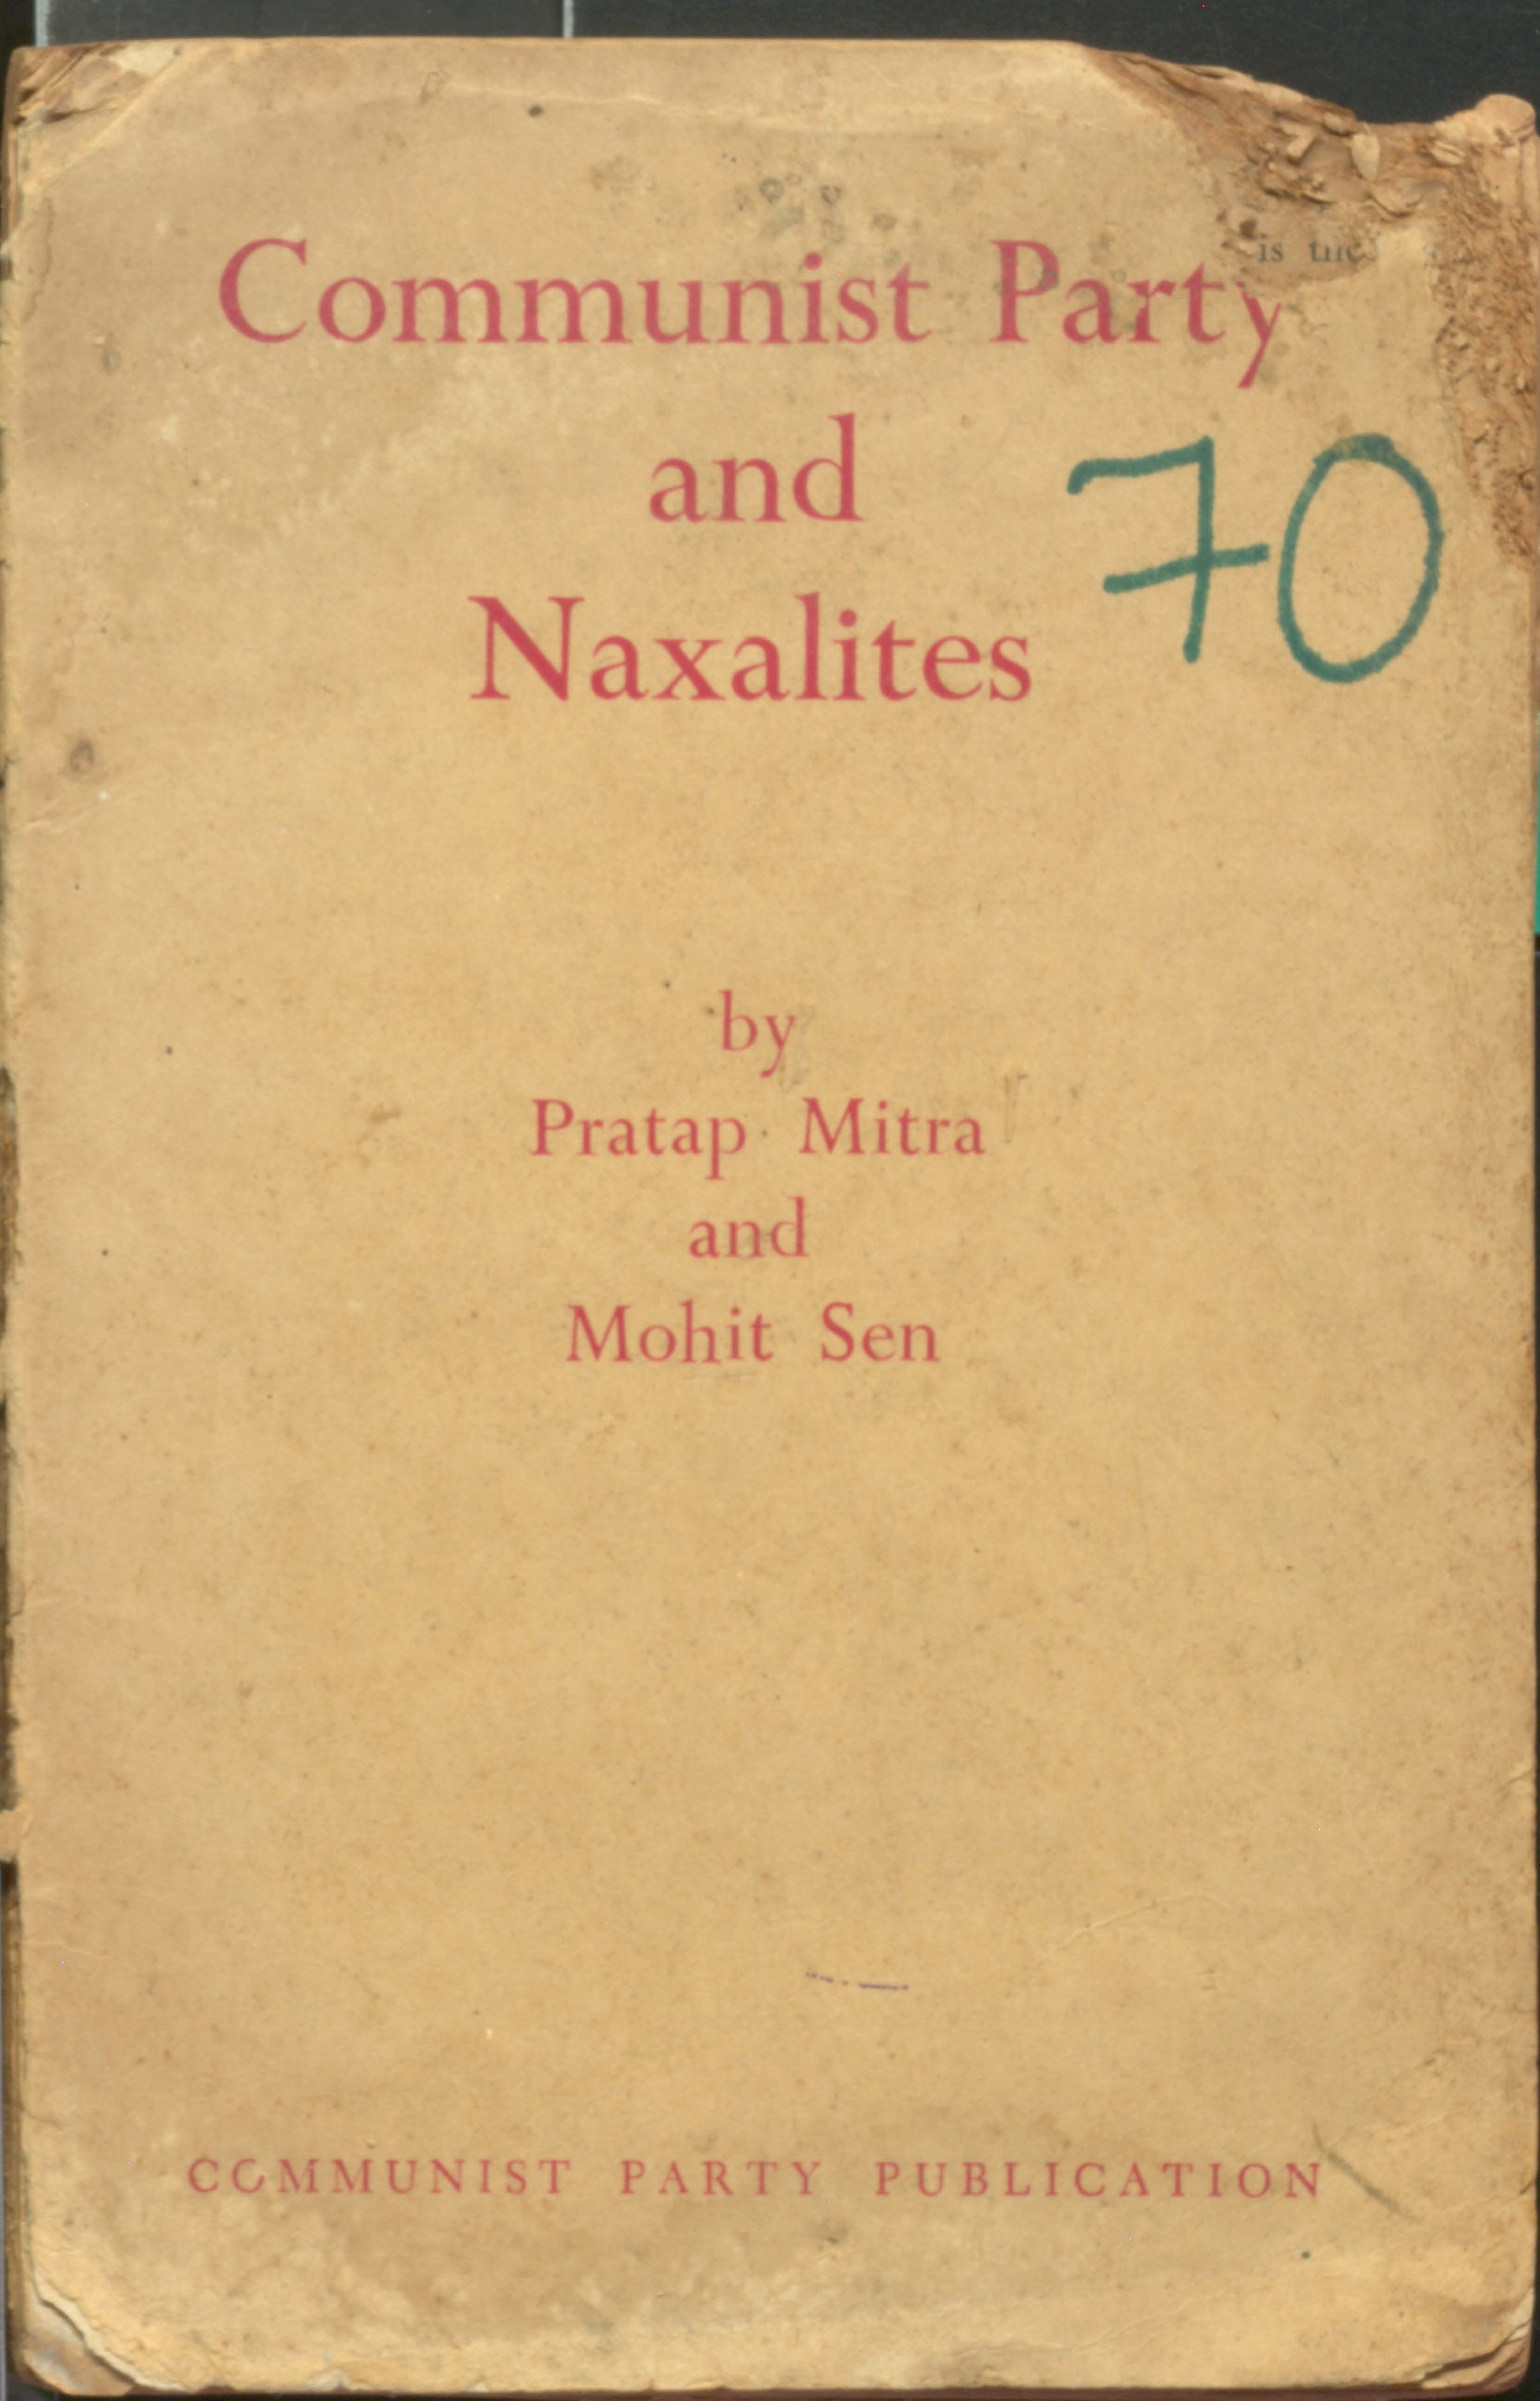 COMMUNIST PARTY AND NAXULITES